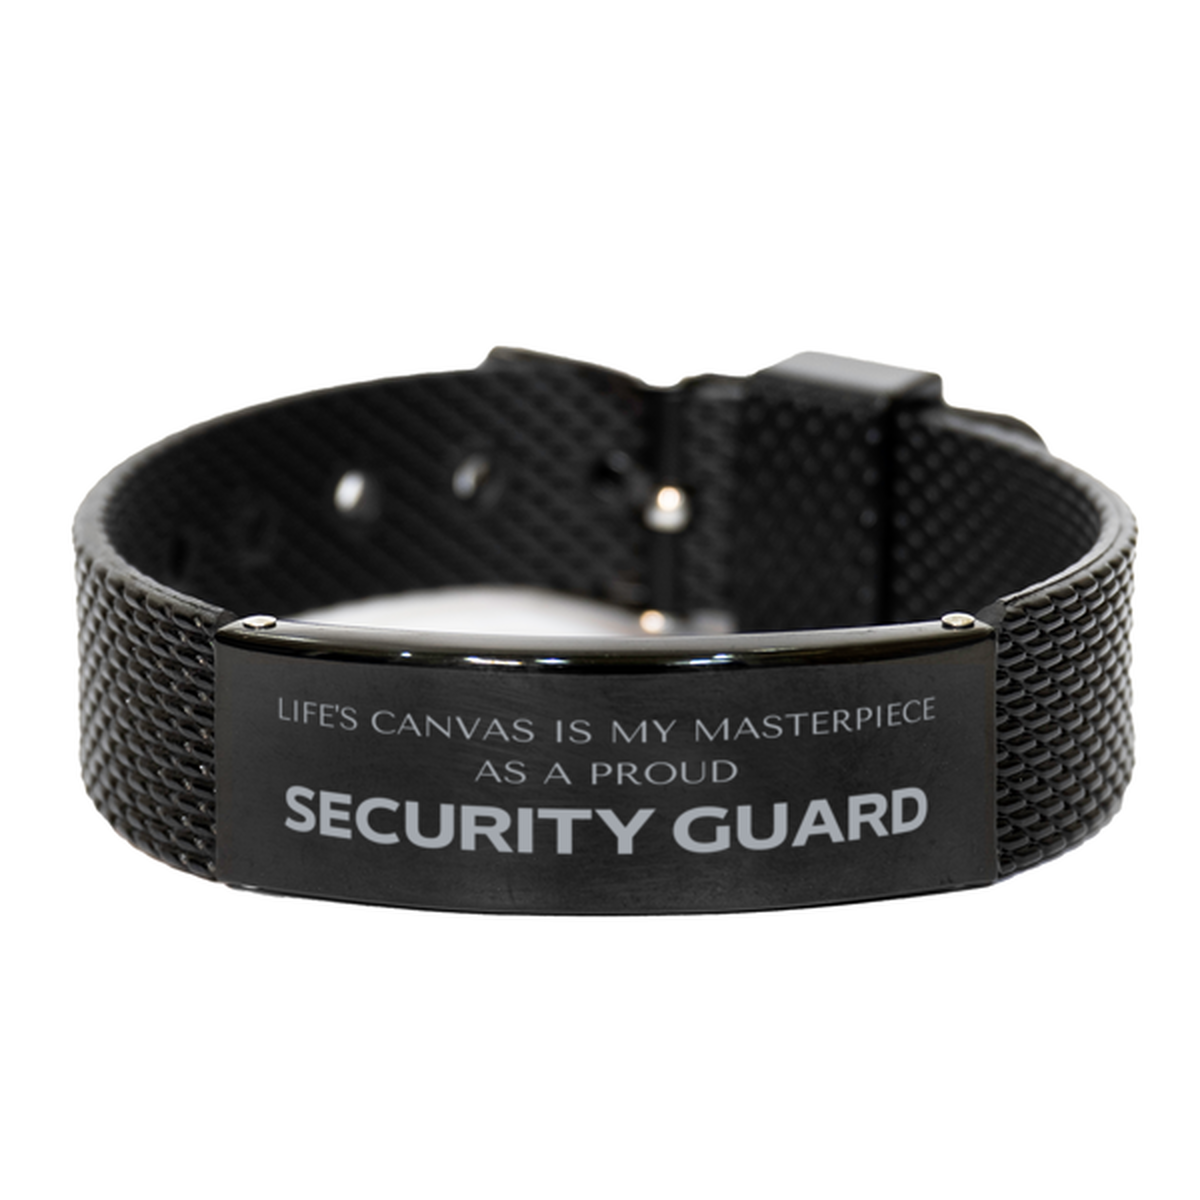 Proud Security Guard Gifts, Life's canvas is my masterpiece, Epic Birthday Christmas Unique Black Shark Mesh Bracelet For Security Guard, Coworkers, Men, Women, Friends